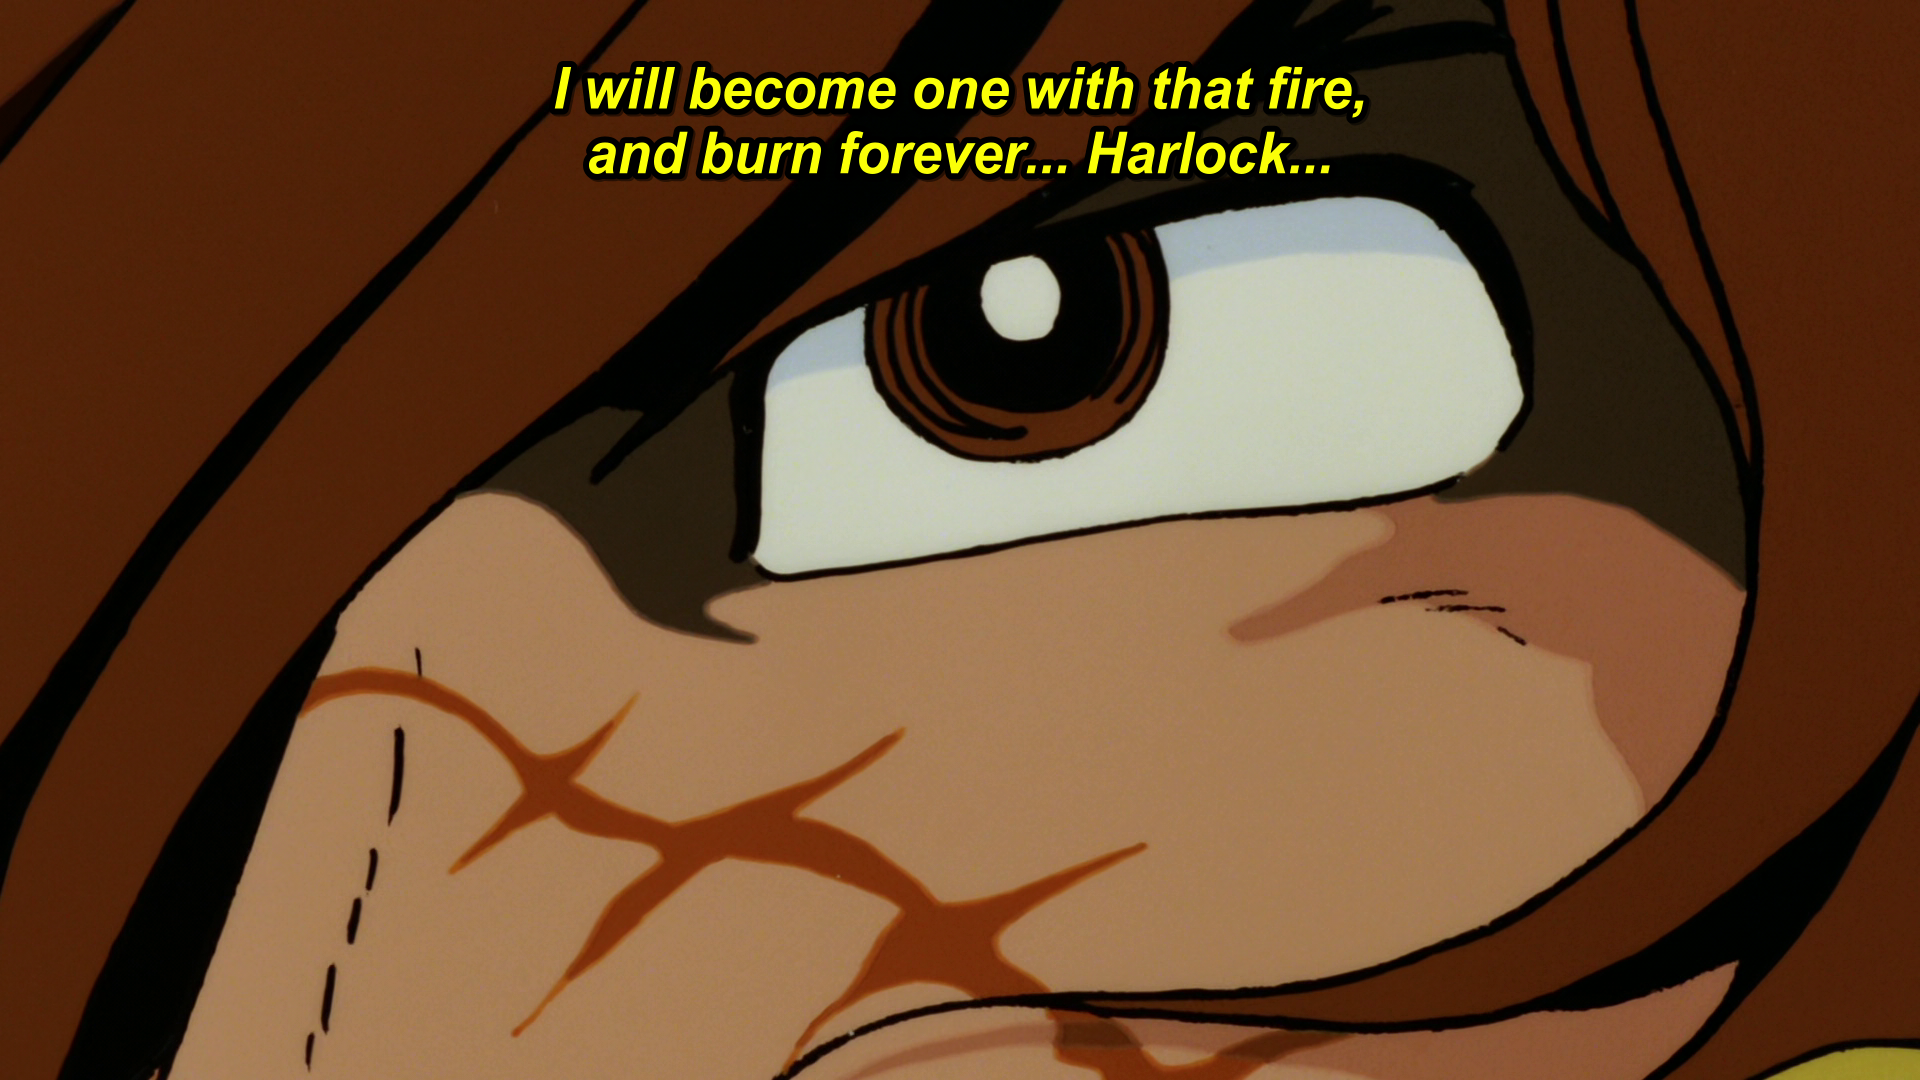 A close up on Harlock's eye as he continues to listen to her message. She says I will become one with that fire, and burn forever... Harlock...